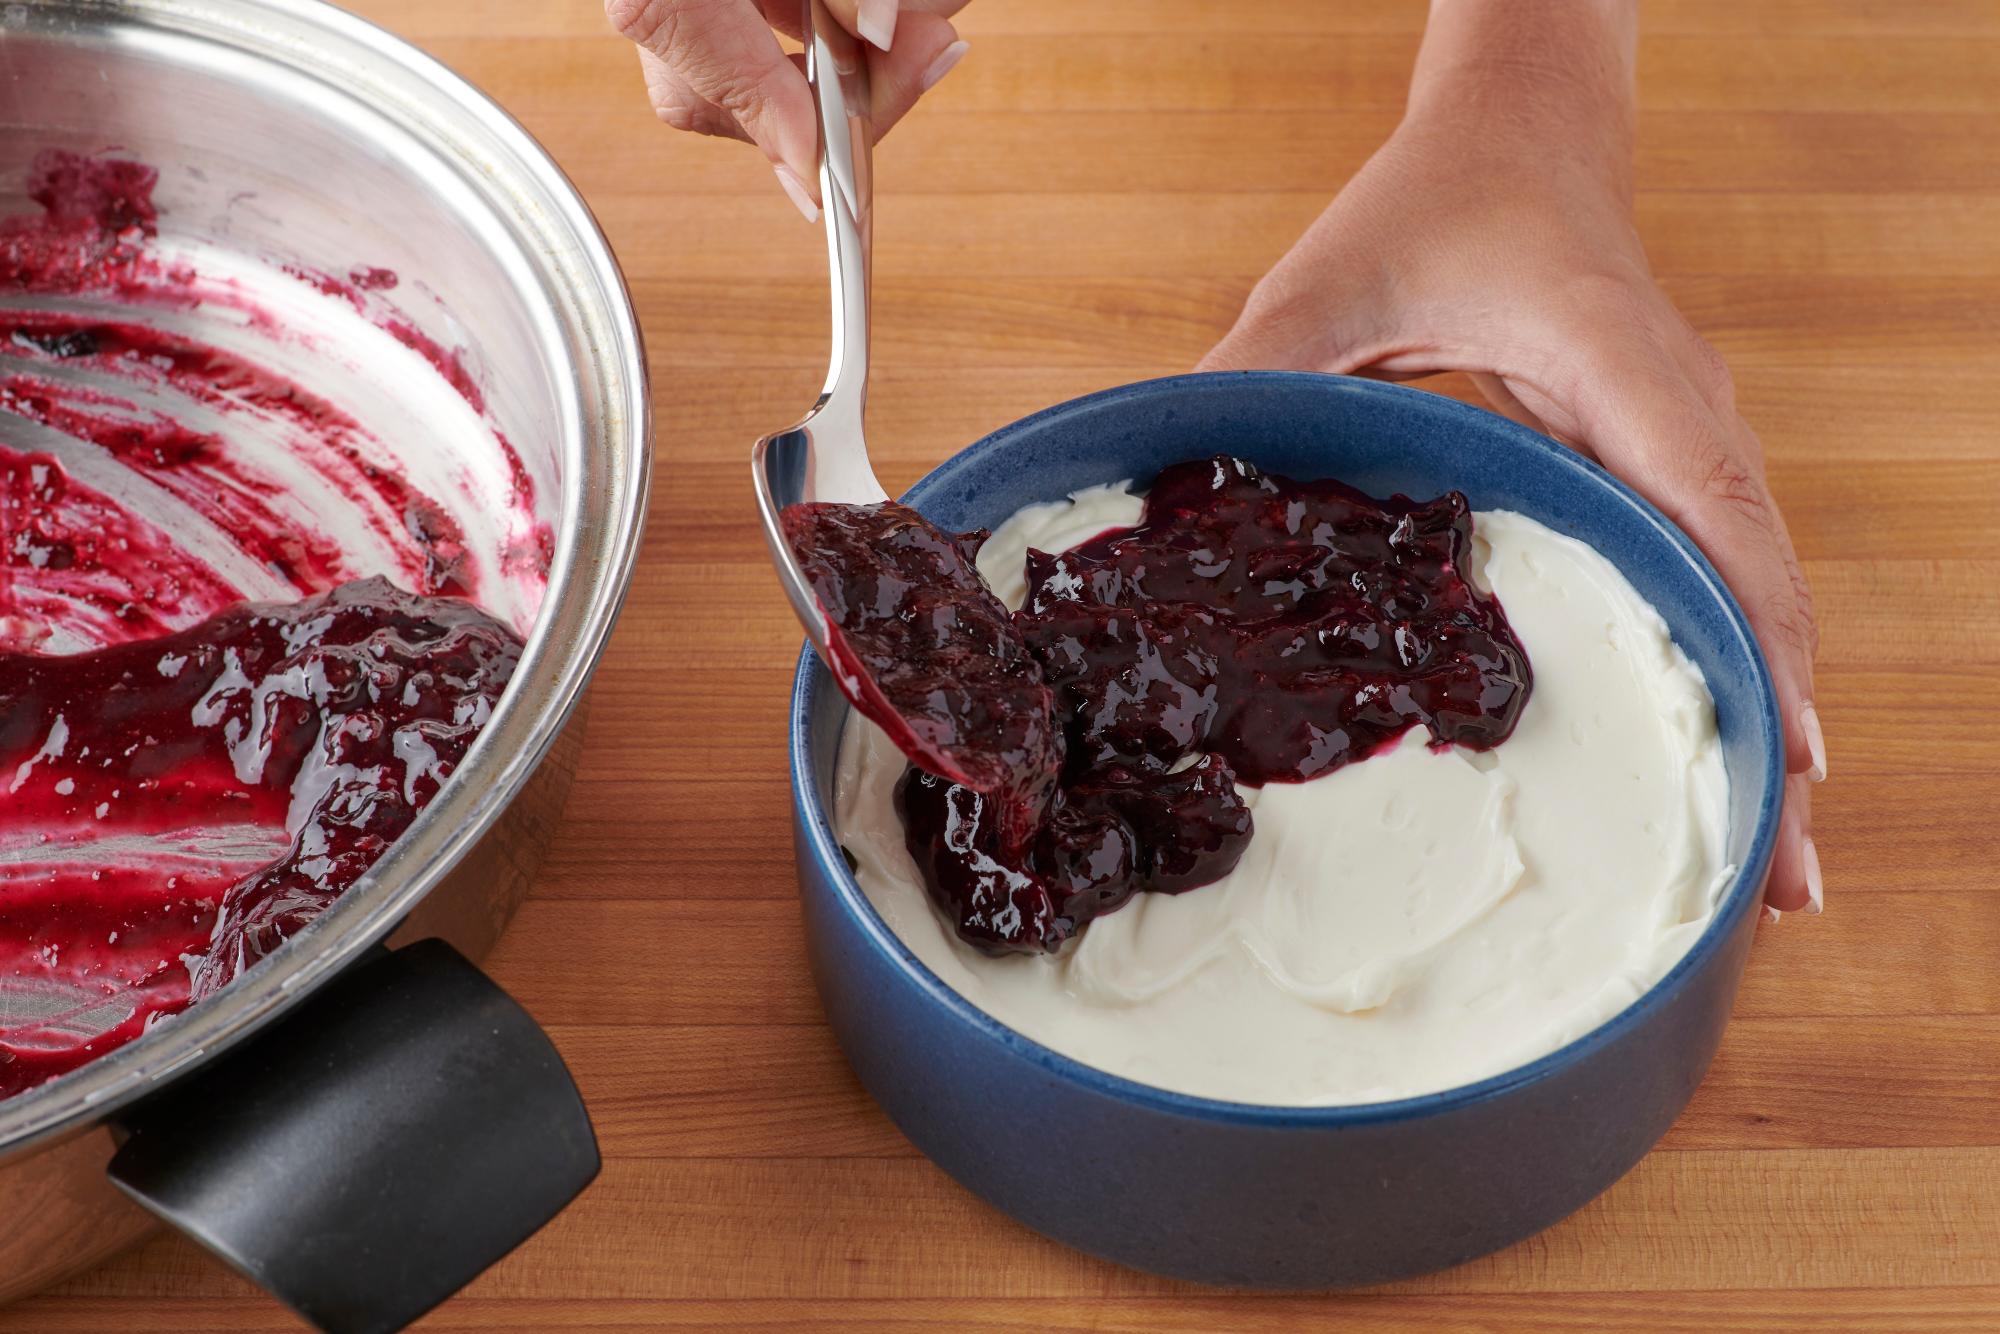 Spooning the mashed blueberries over the cream cheese mixture.